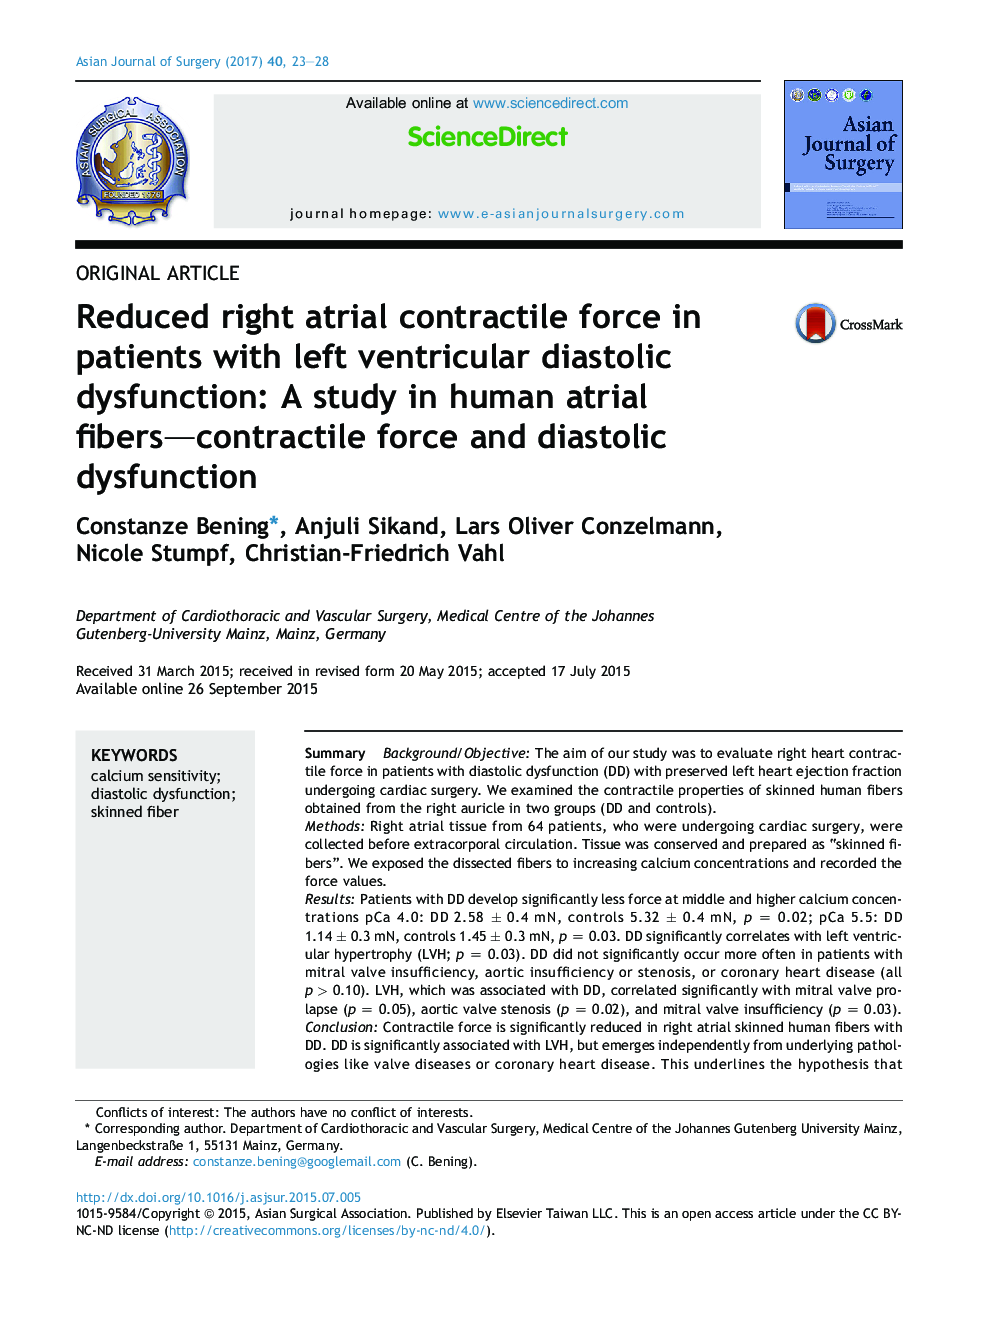 Original articleReduced right atrial contractile force in patients with left ventricular diastolic dysfunction: A study in human atrial fibers-contractile force and diastolic dysfunction